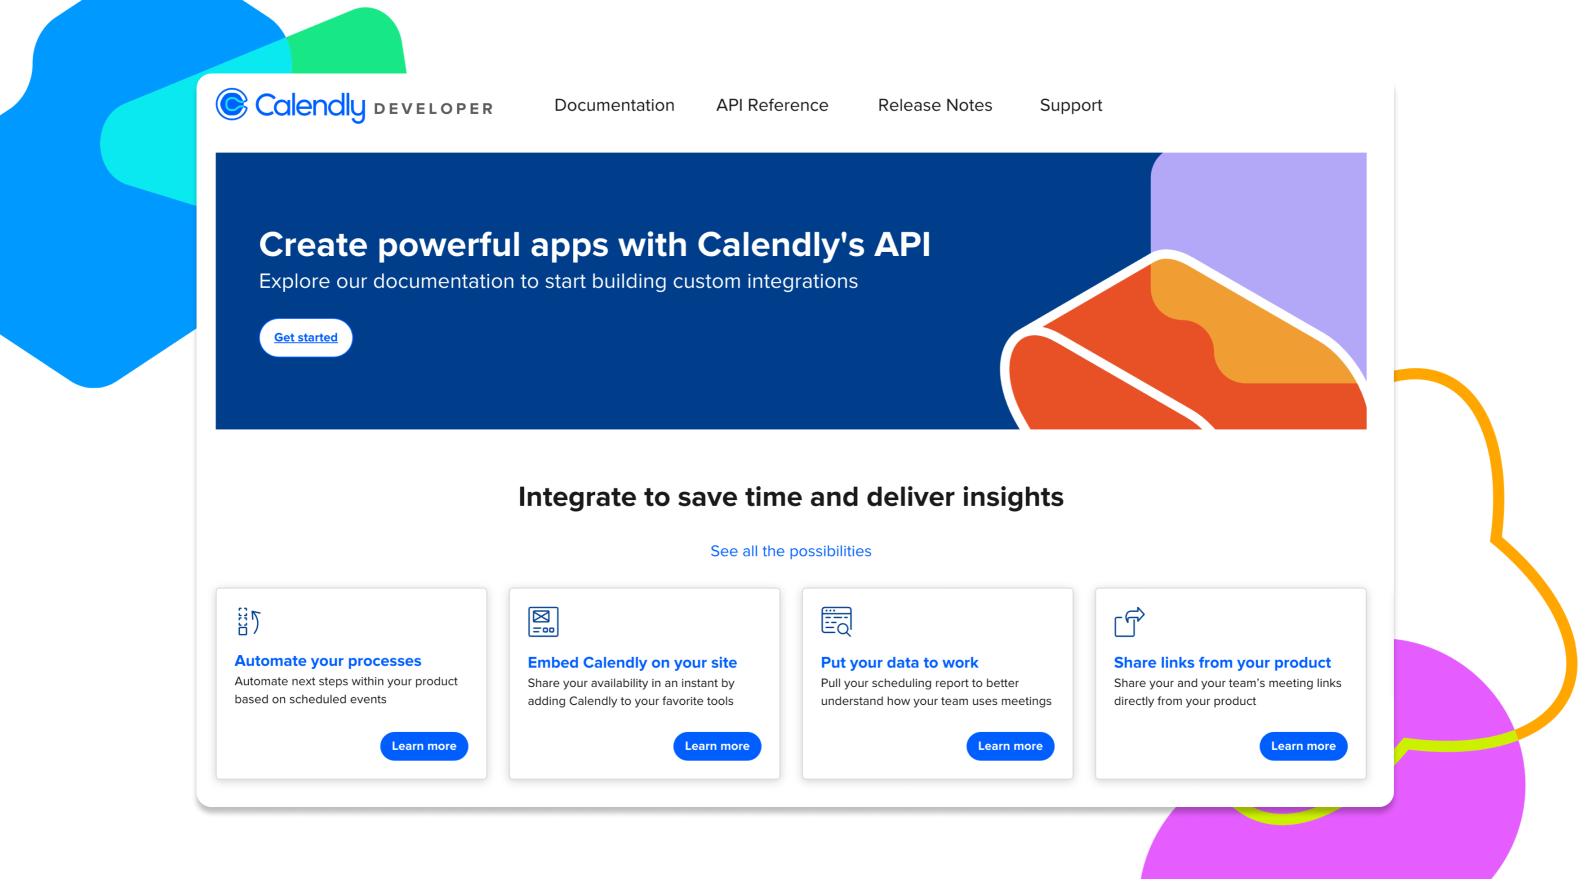 Build powerful custom apps with Calendly’s APIs and Developer Portal